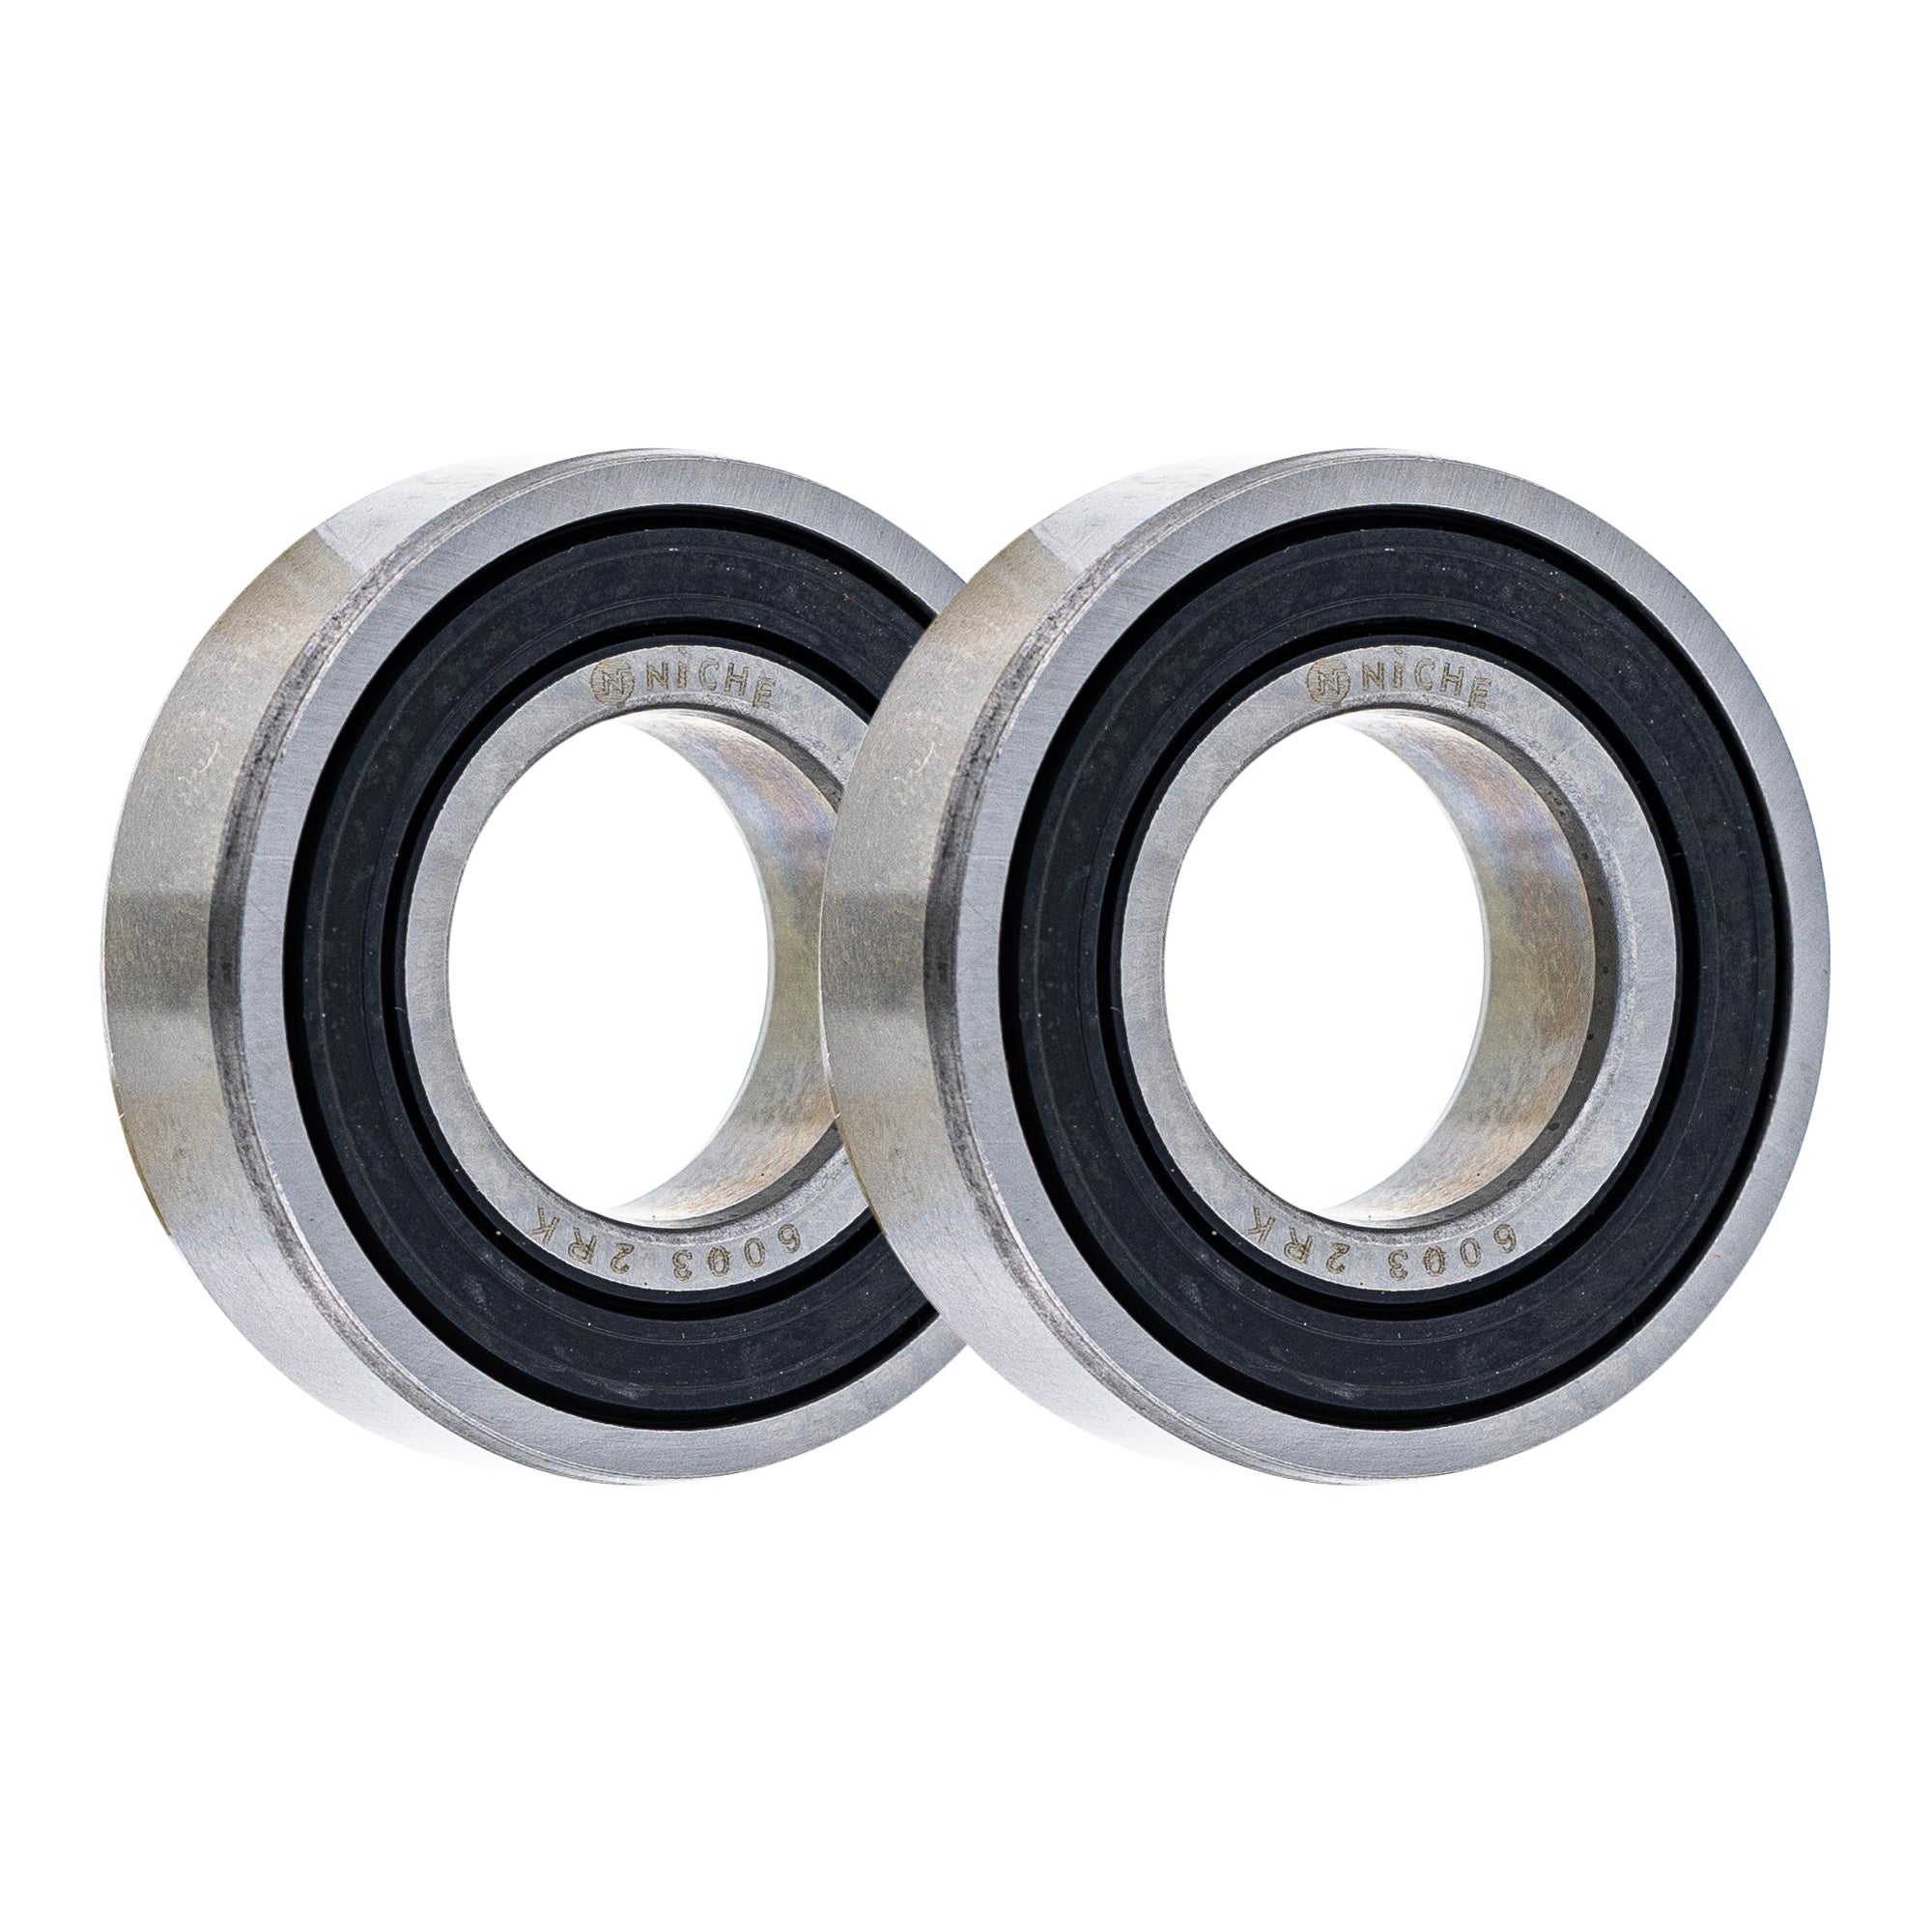 Electric Grade, Single Row, Deep Groove, Ball Bearing Pack of 2 2-Pack for zOTHER Arctic NICHE 519-CBB2325R